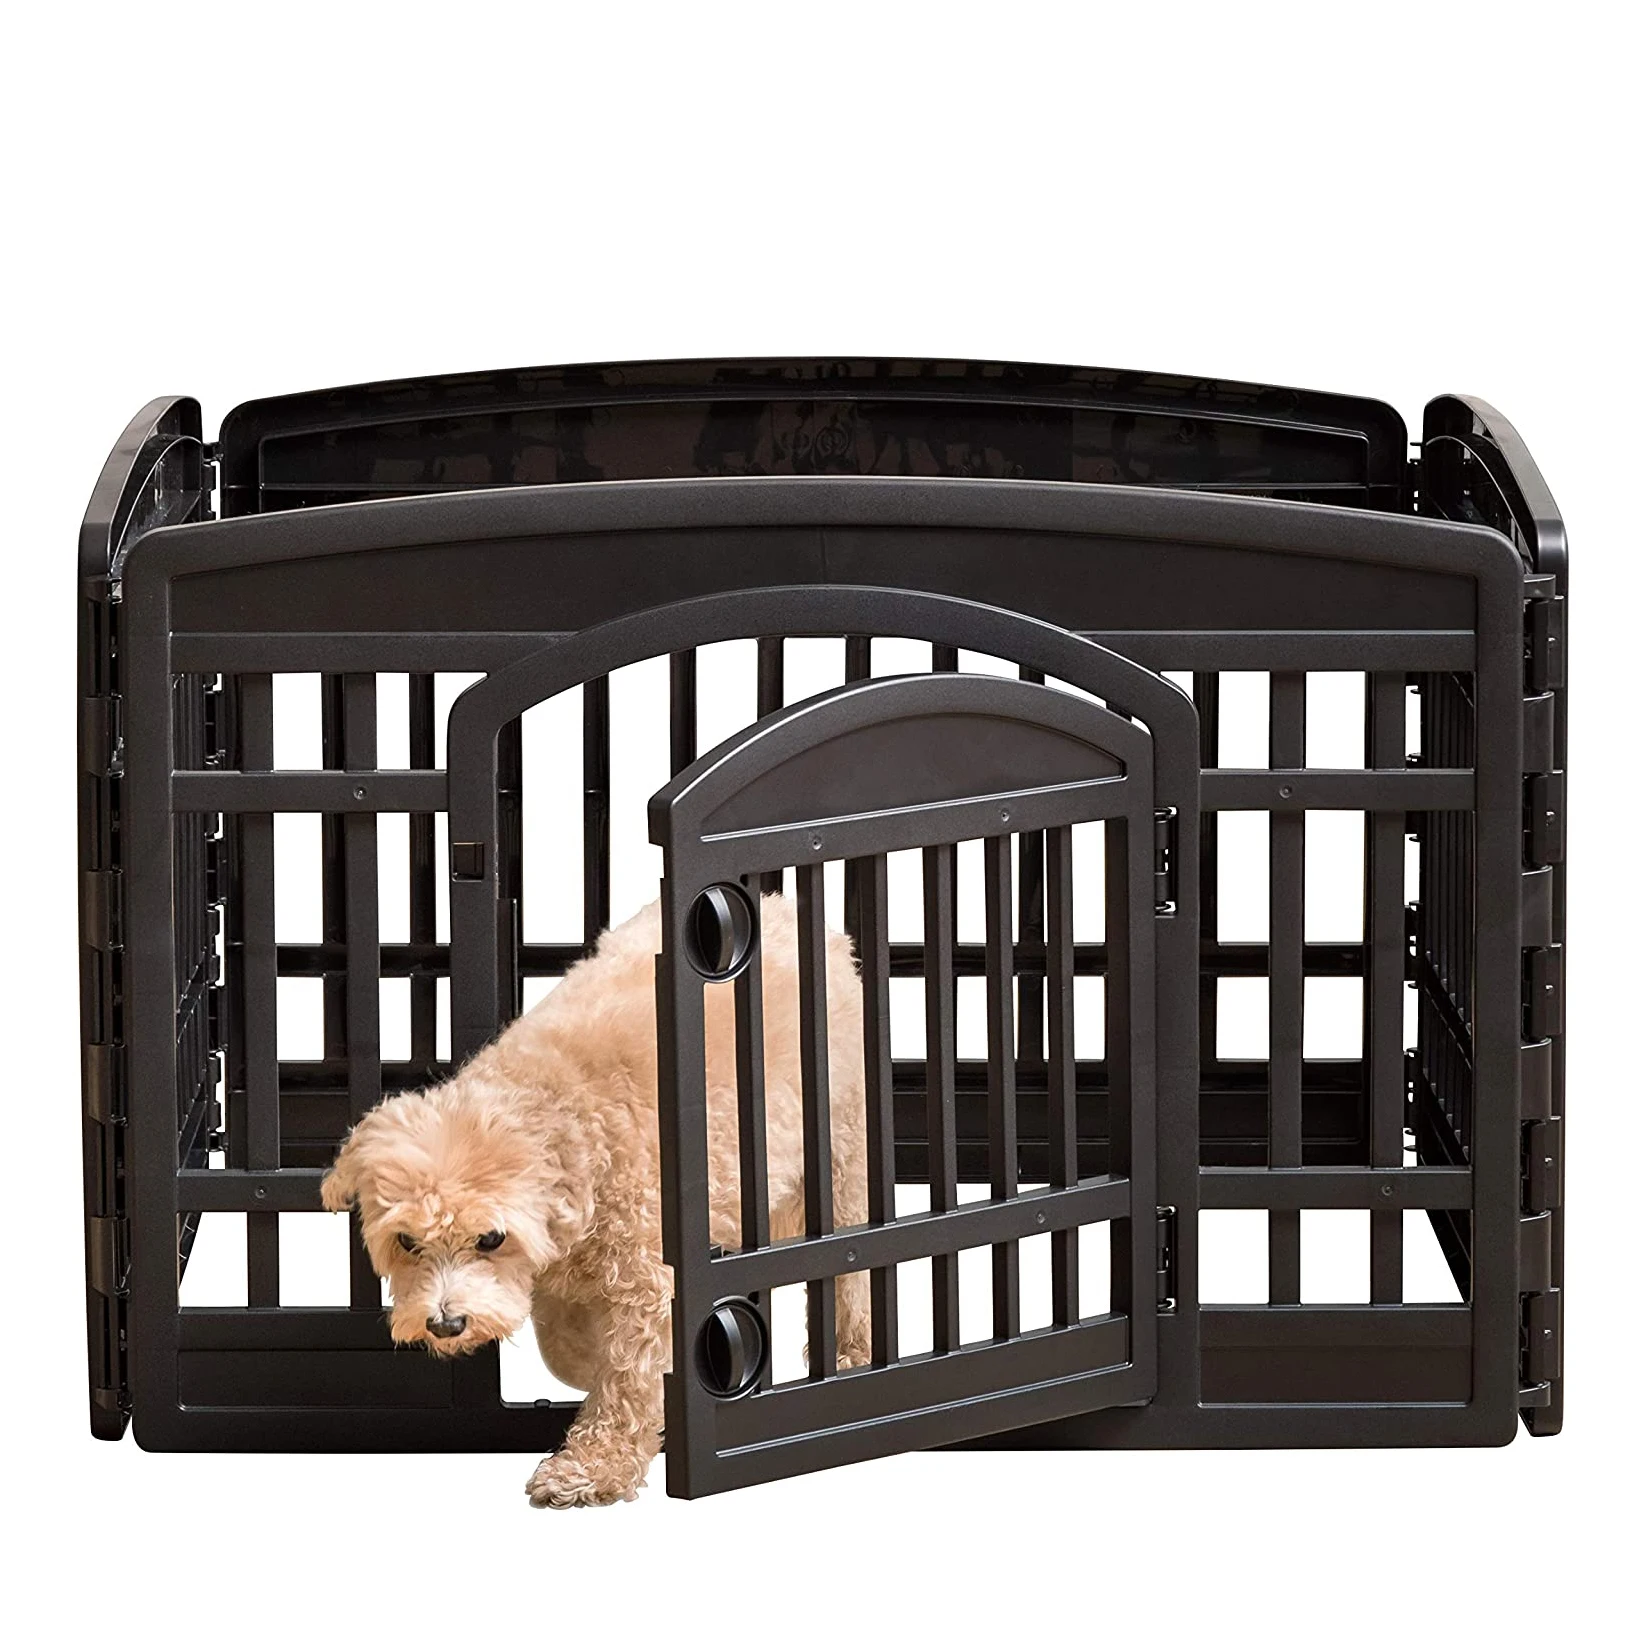 

Wholesale Pet Furniture 4-Panel Puppy Small Portable Play Fence Plastic Dog Exercise Pen Pet Playpen with lockable pet door, White